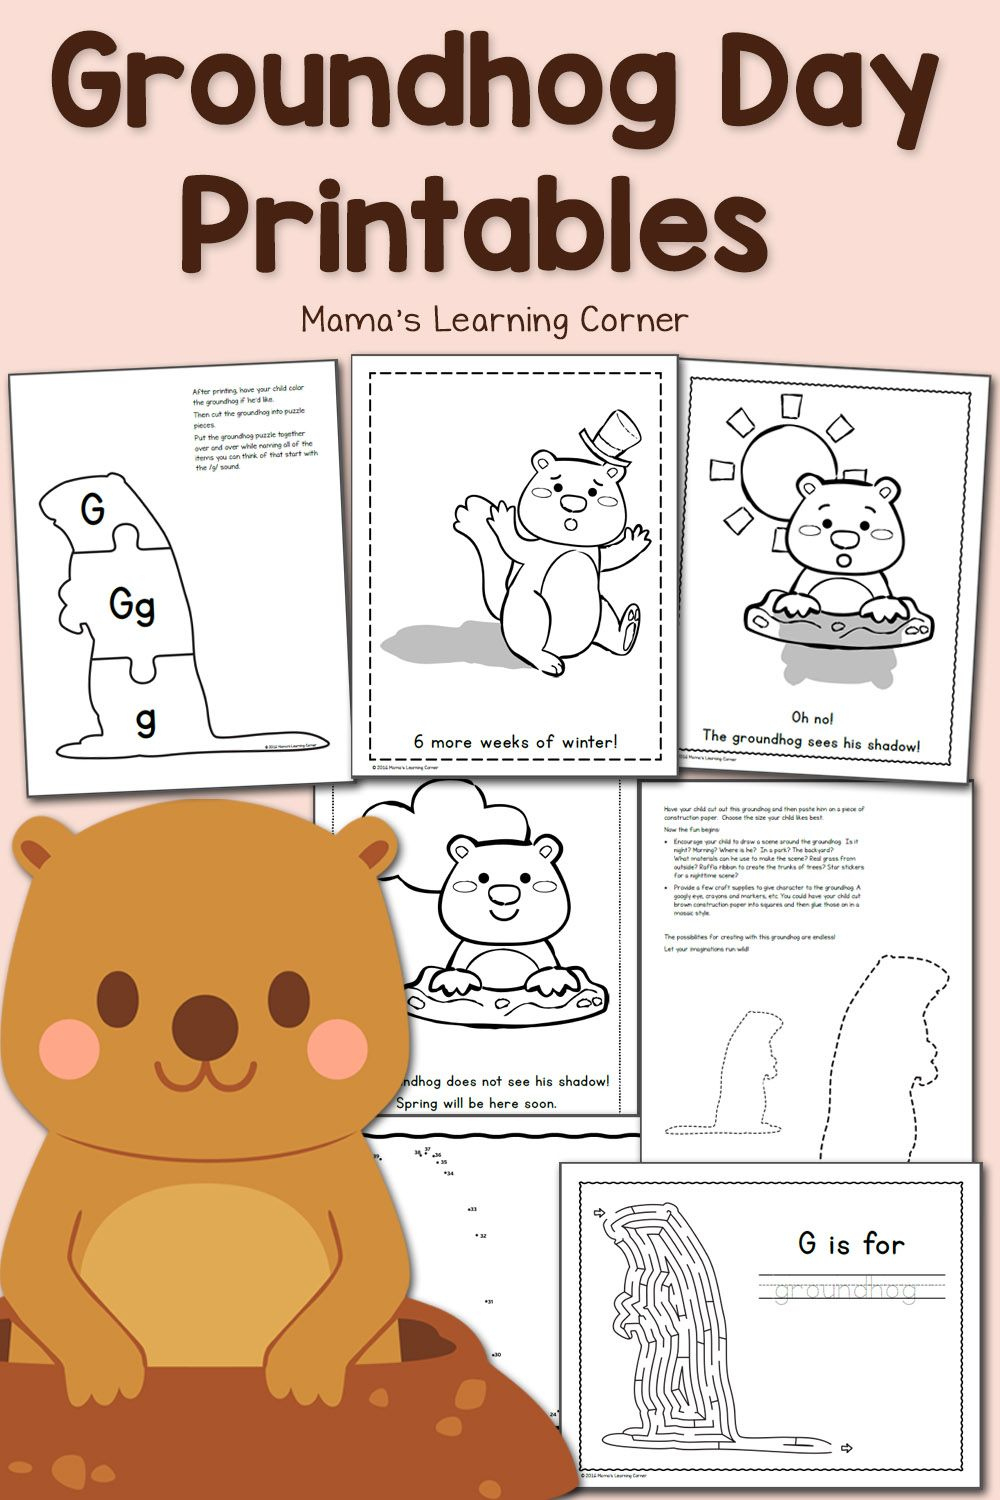 Groundhog Activities And Worksheets | Groundhog Day Activities throughout Free Printable Groundhog Day Booklet